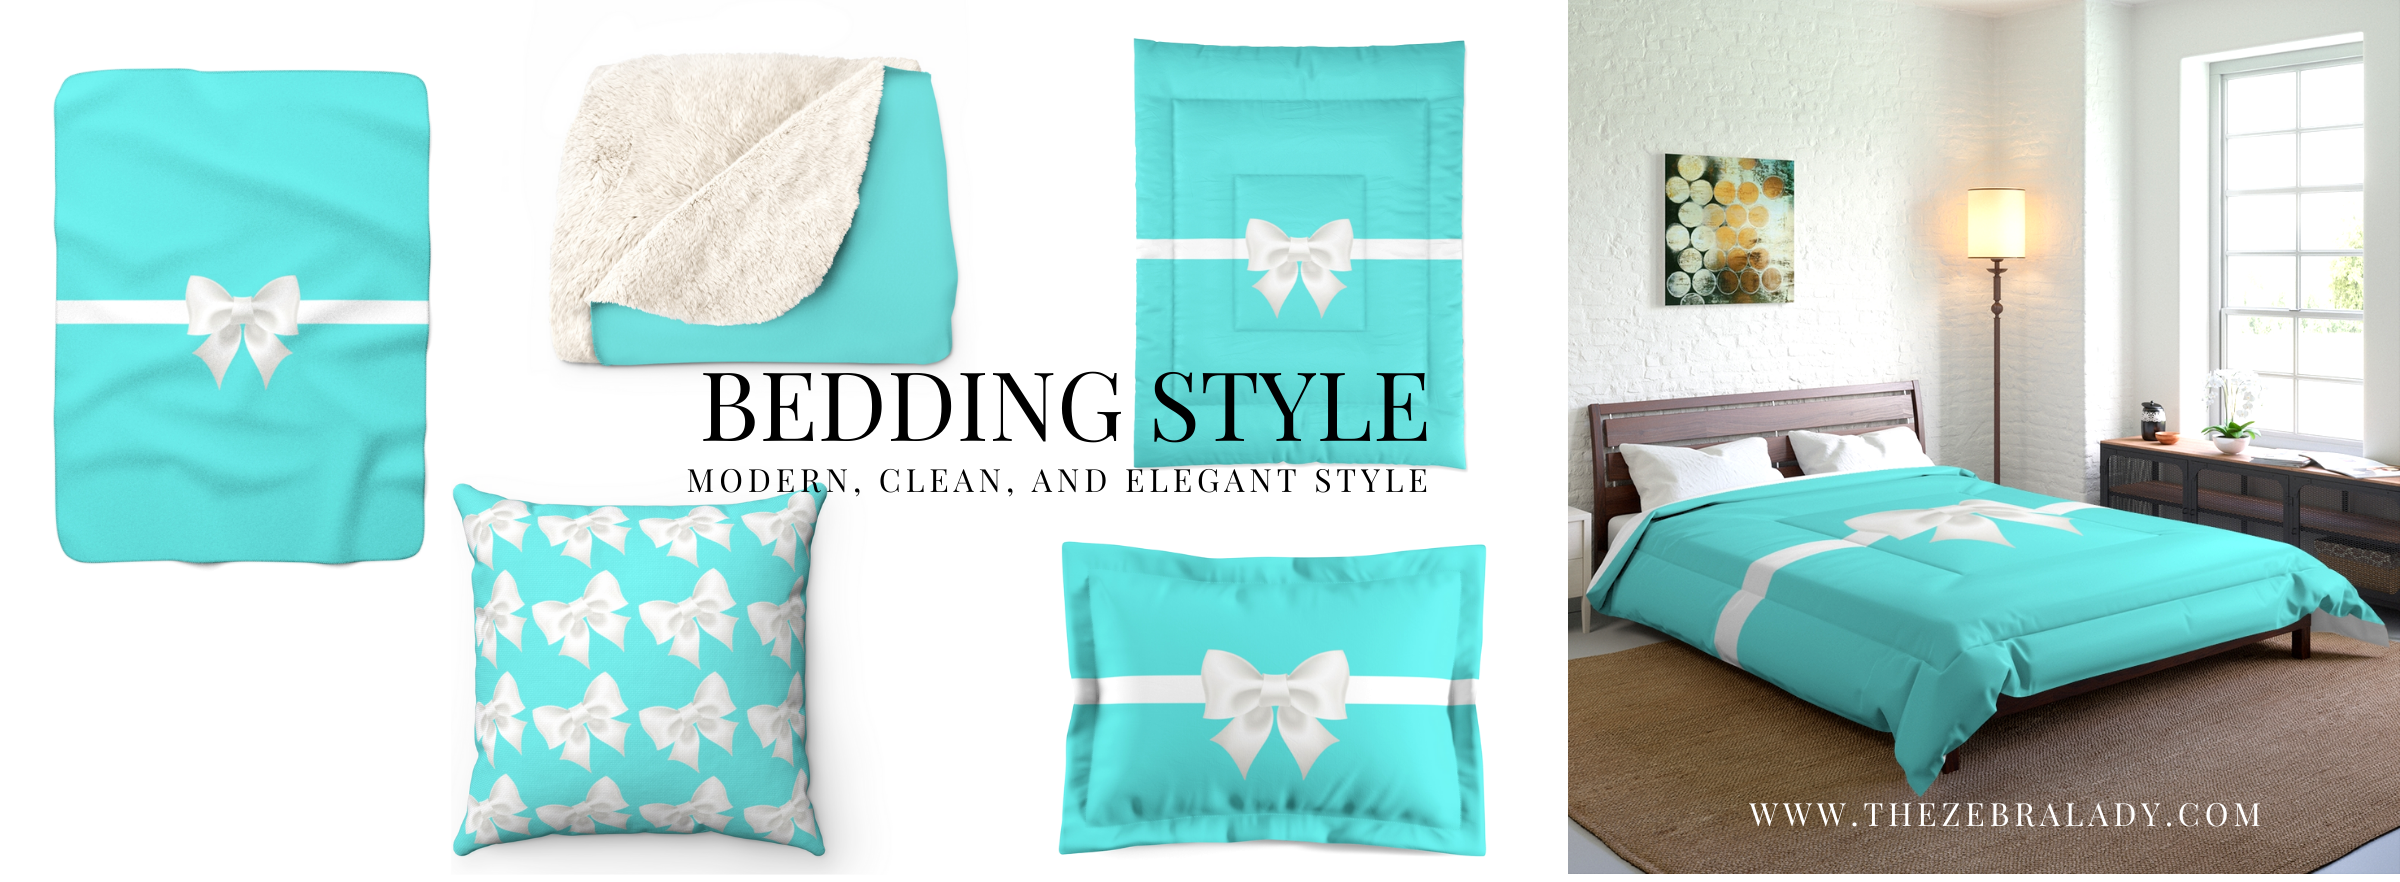 bedding in style www.thezebralady.com.png